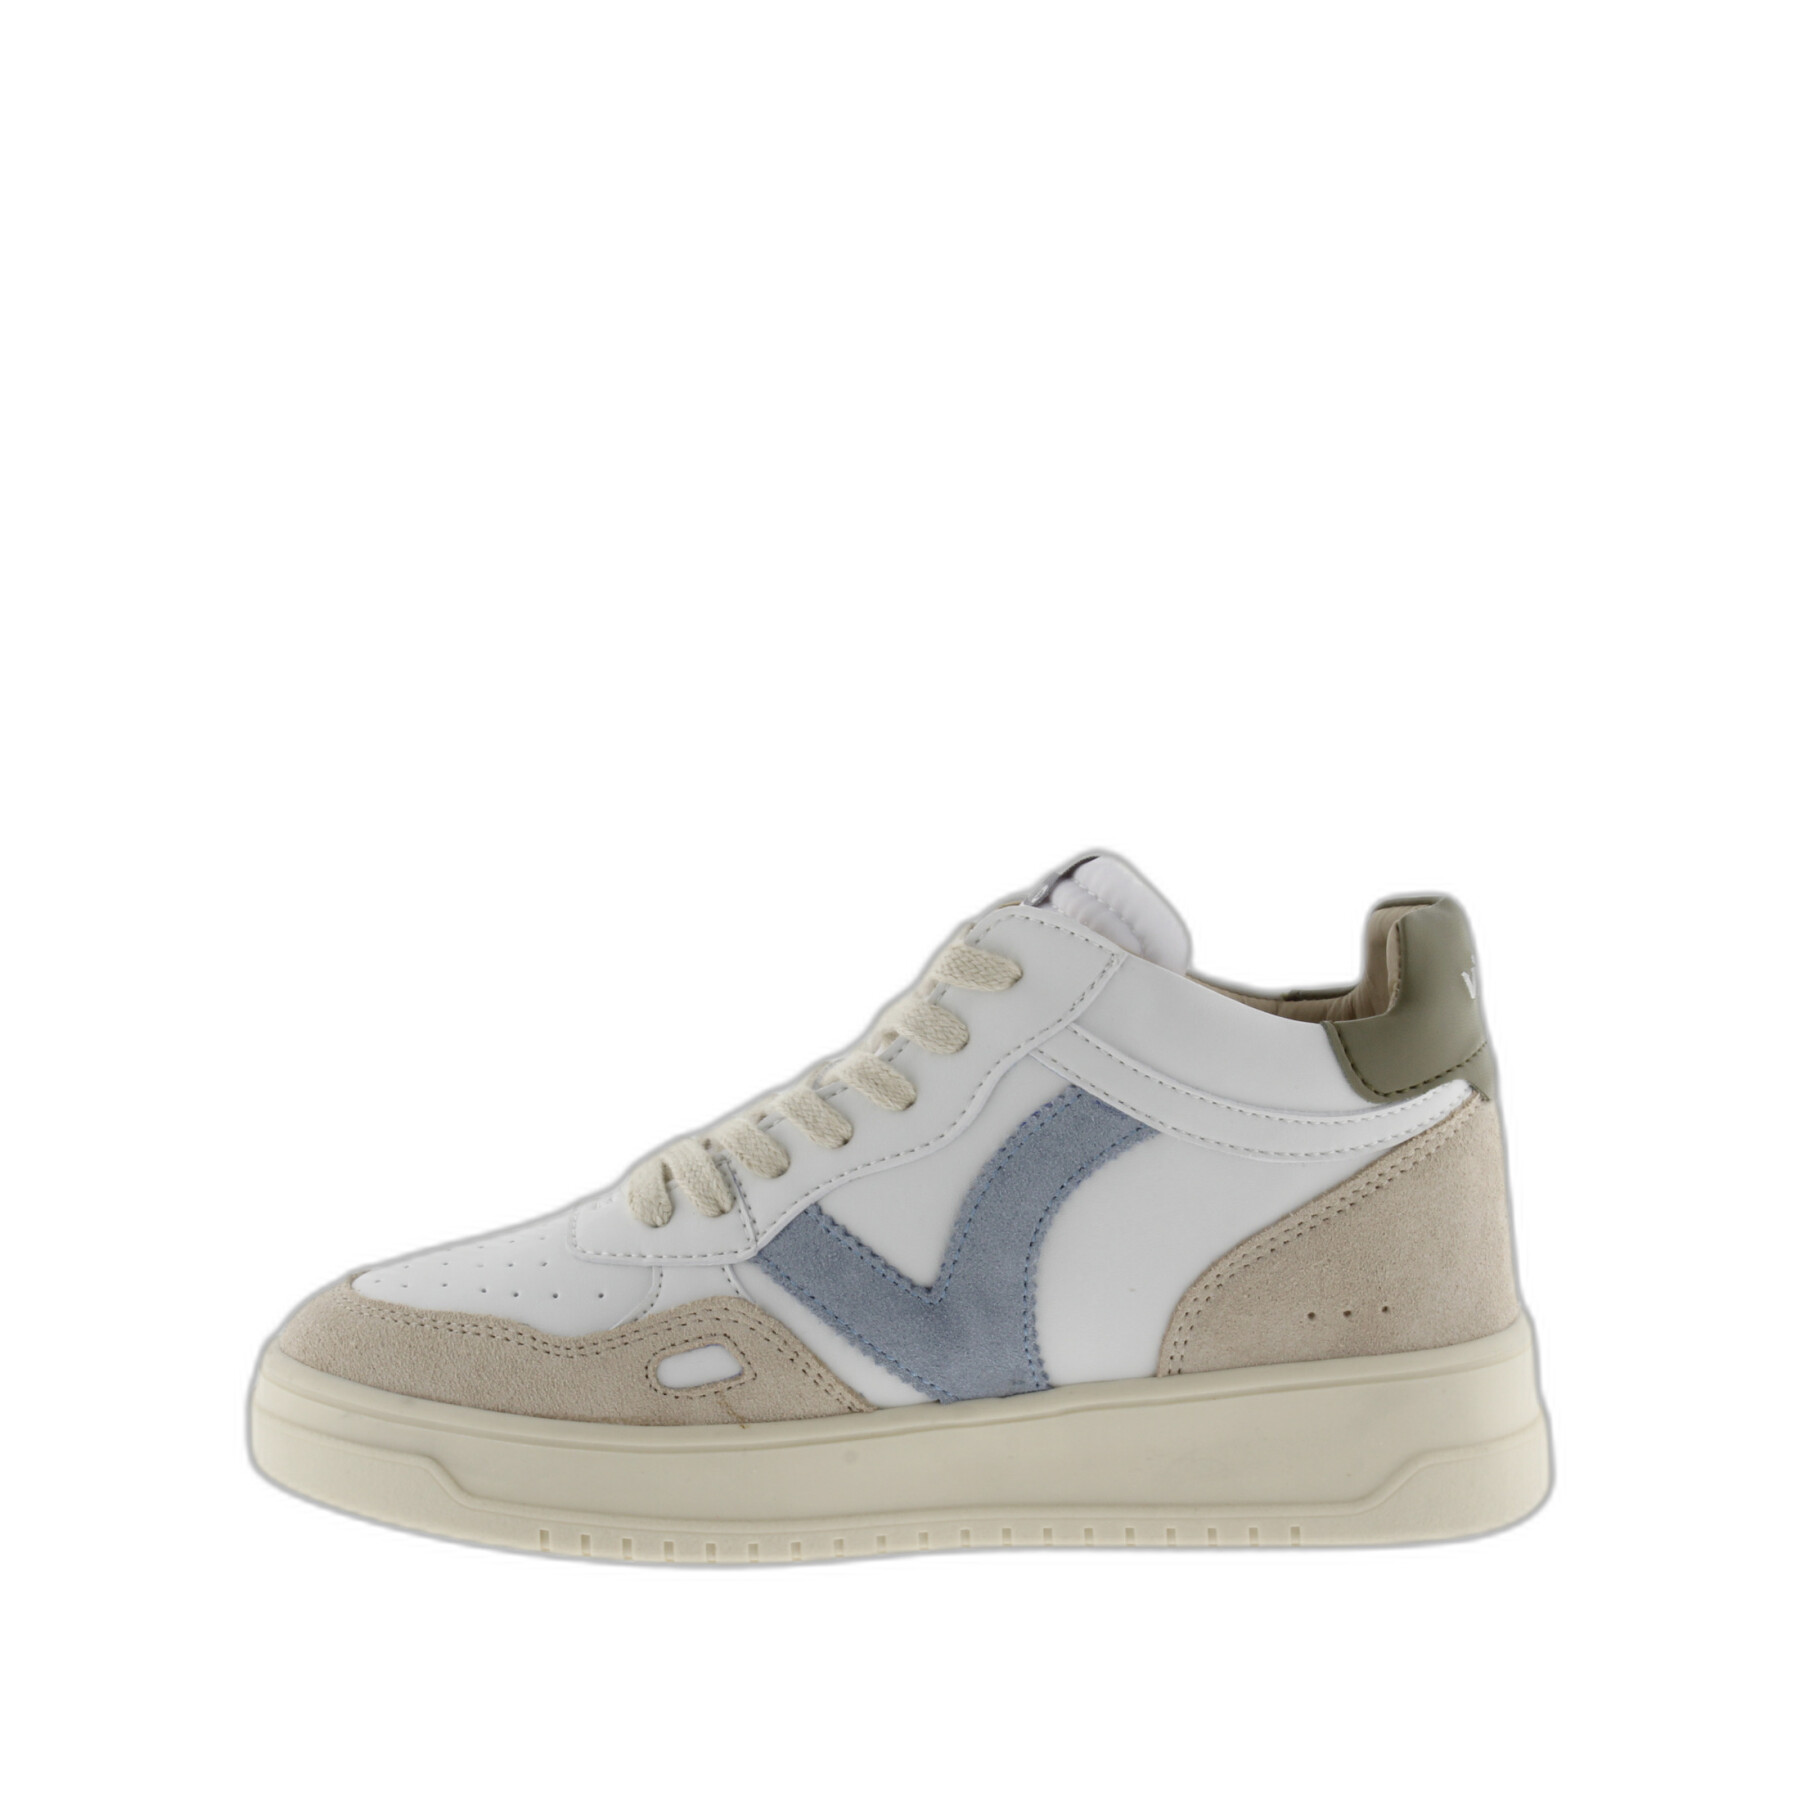 Leather effect and split leather sneakers Victoria Seul